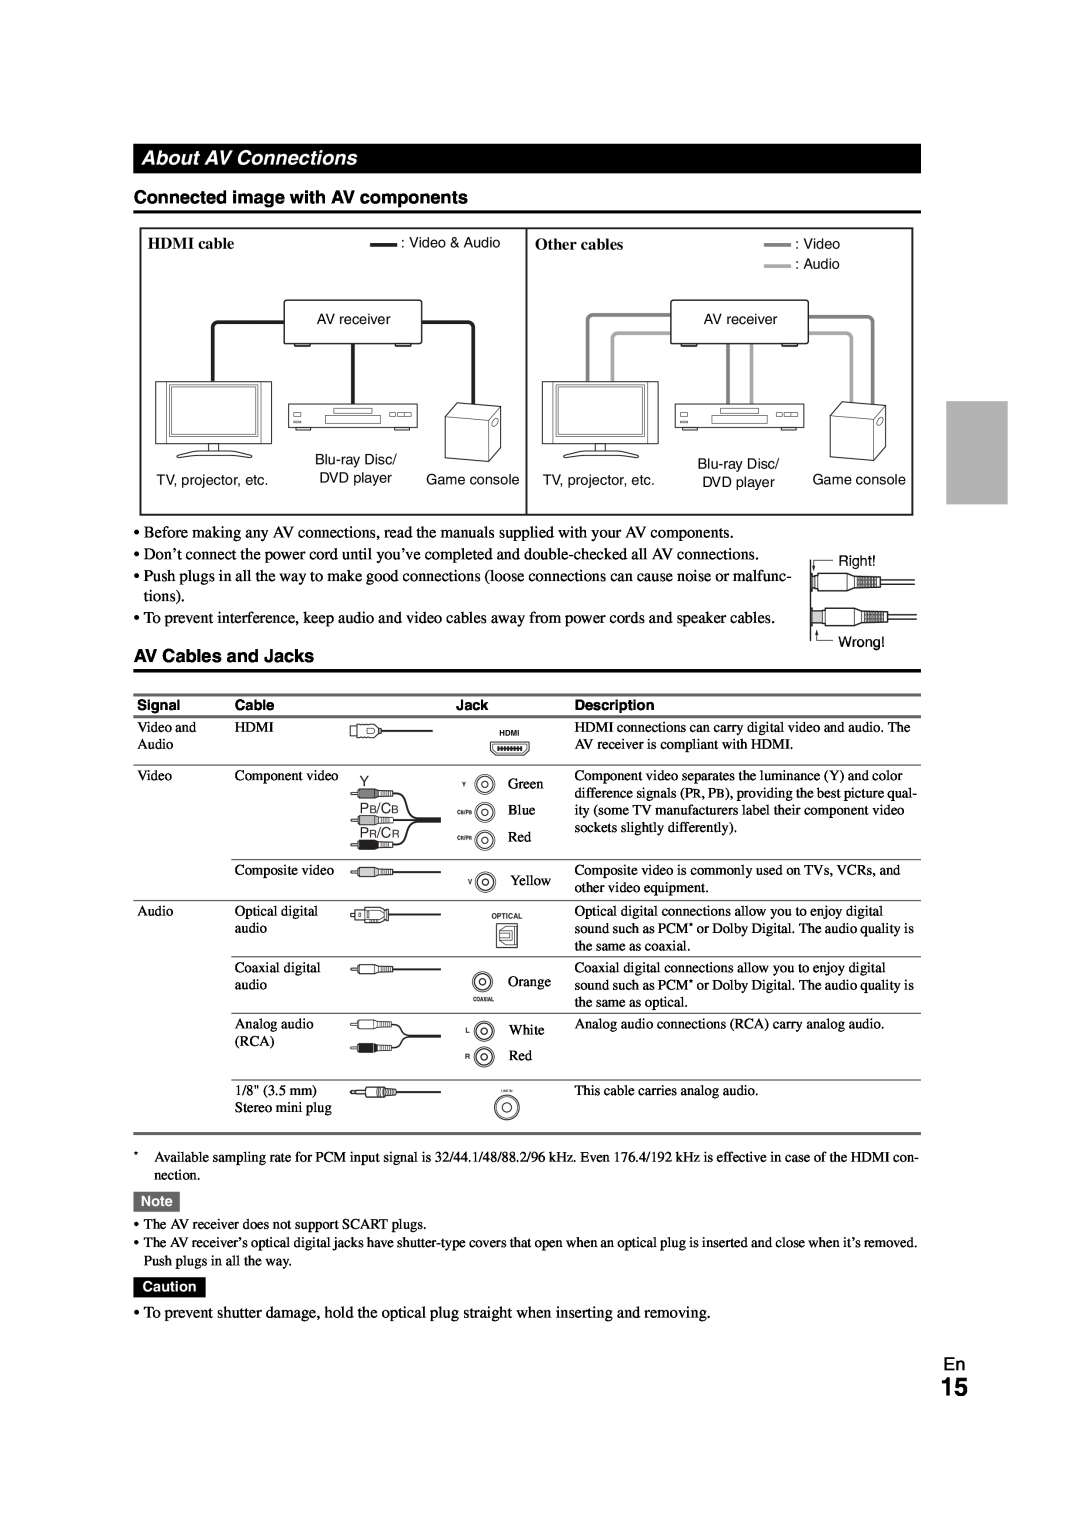 Onkyo HT-S3300 instruction manual About AV Connections, Connected image with AV components, AV Cables and Jacks 